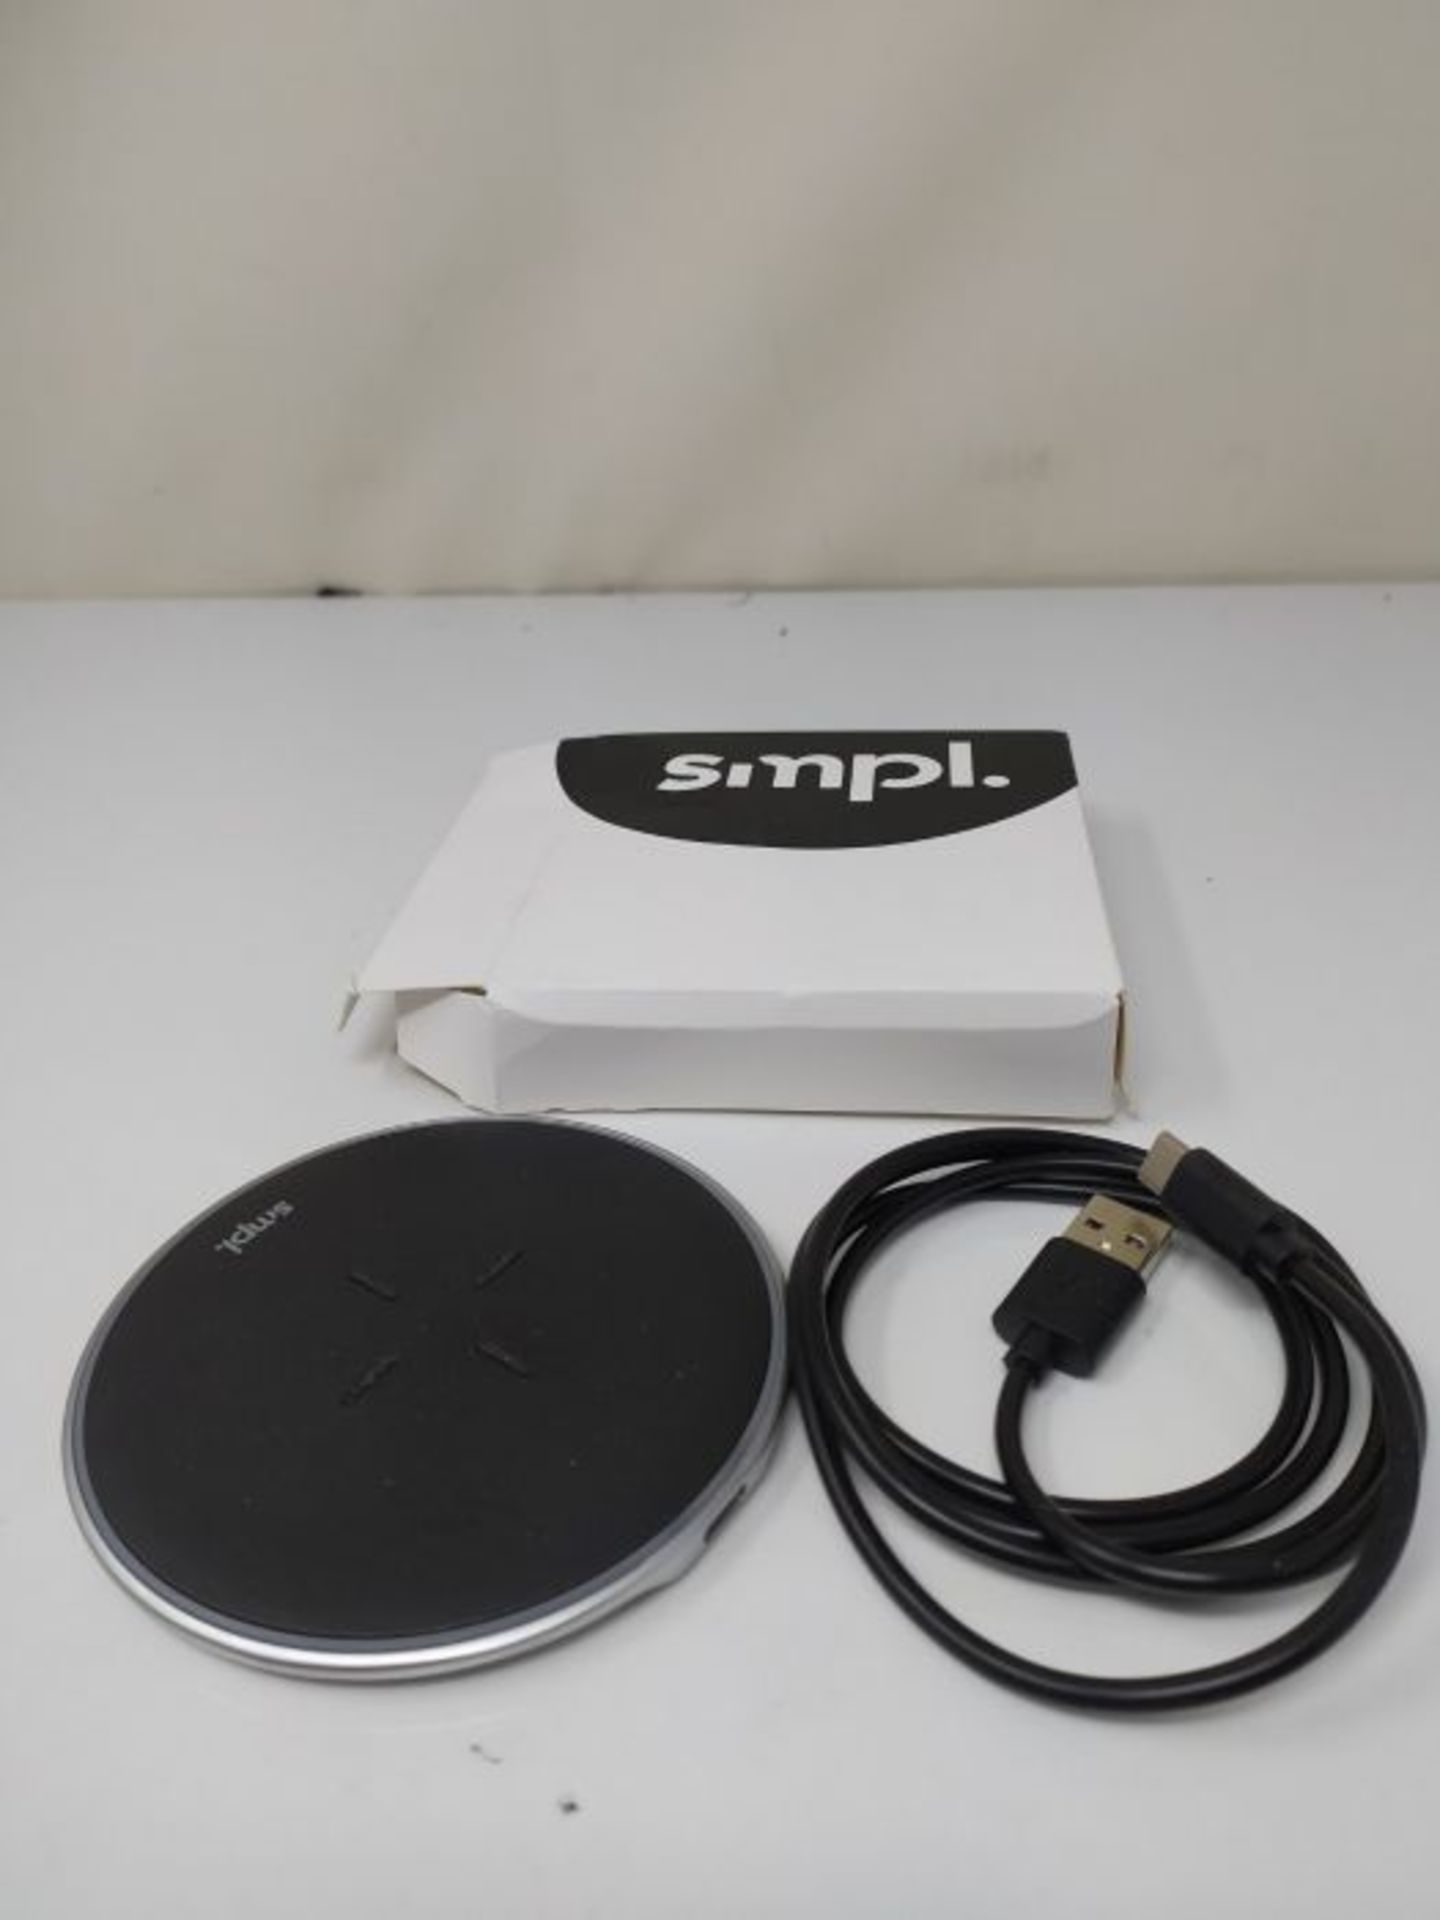 Smpl Fast Wireless Charger - 10W Wireless Charging Pad, Compatible with iPhone 12/12 P - Image 2 of 2